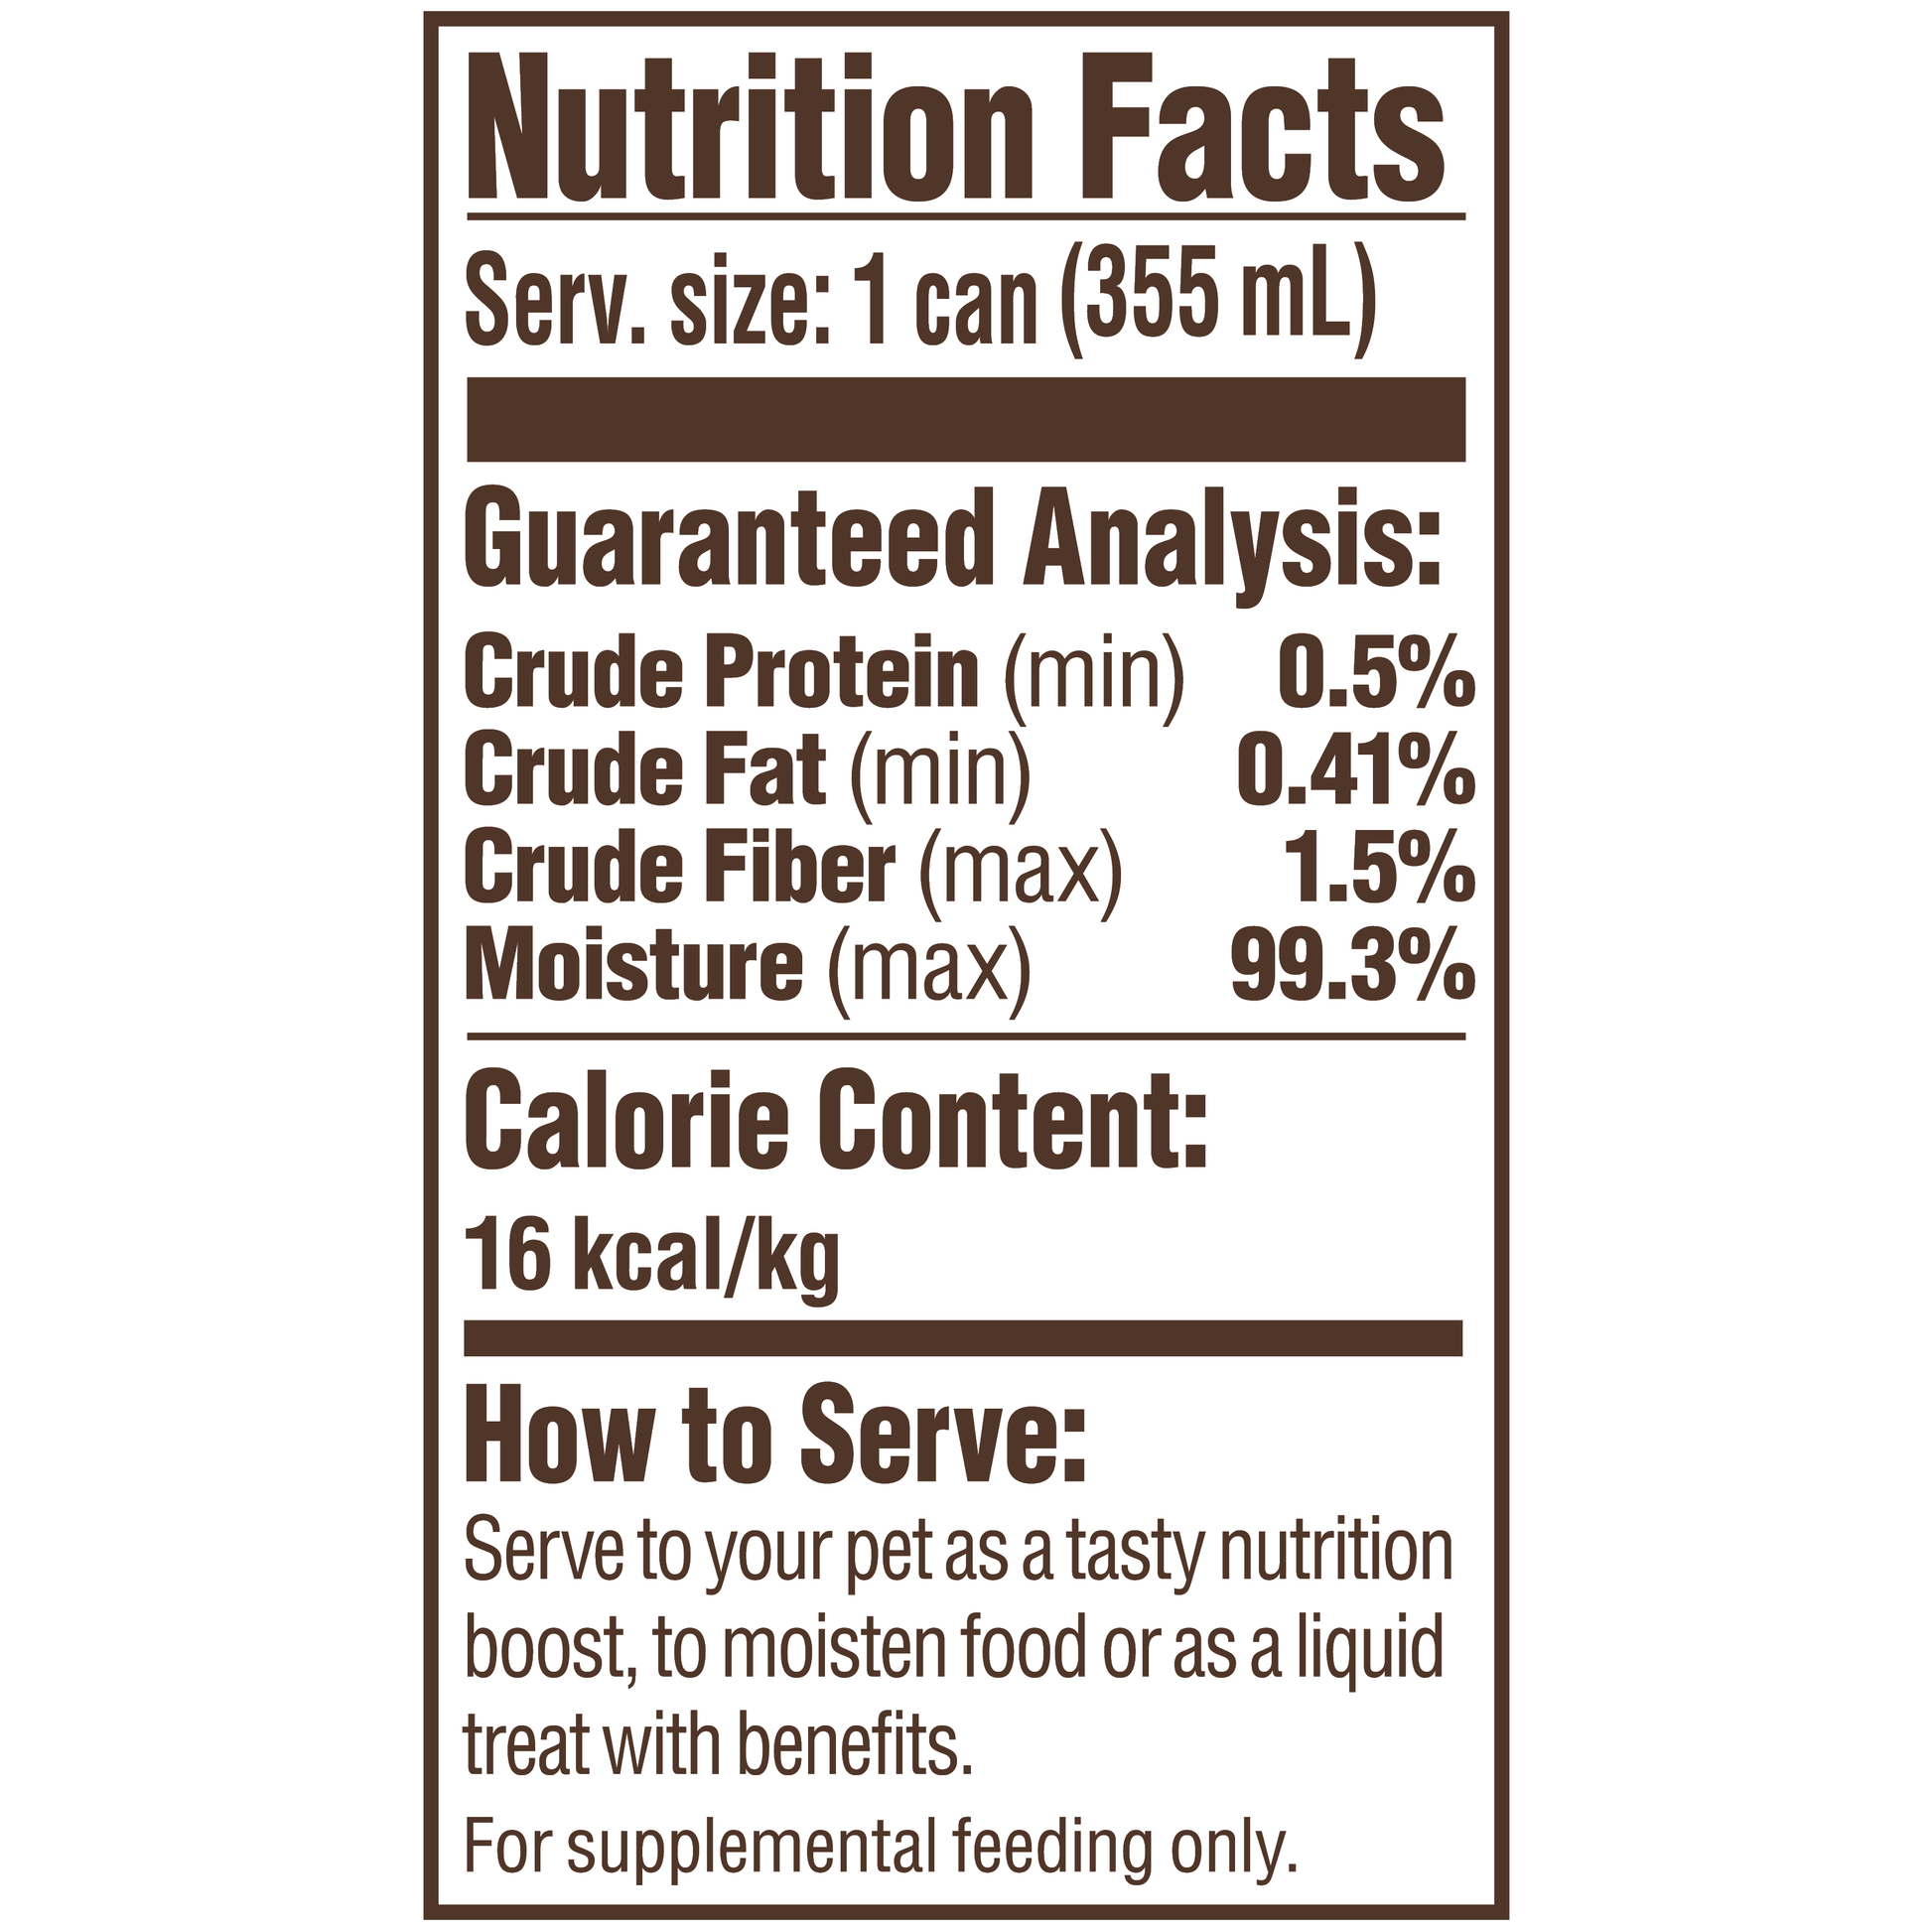 Dog Brew by Busch Nutrition Facts